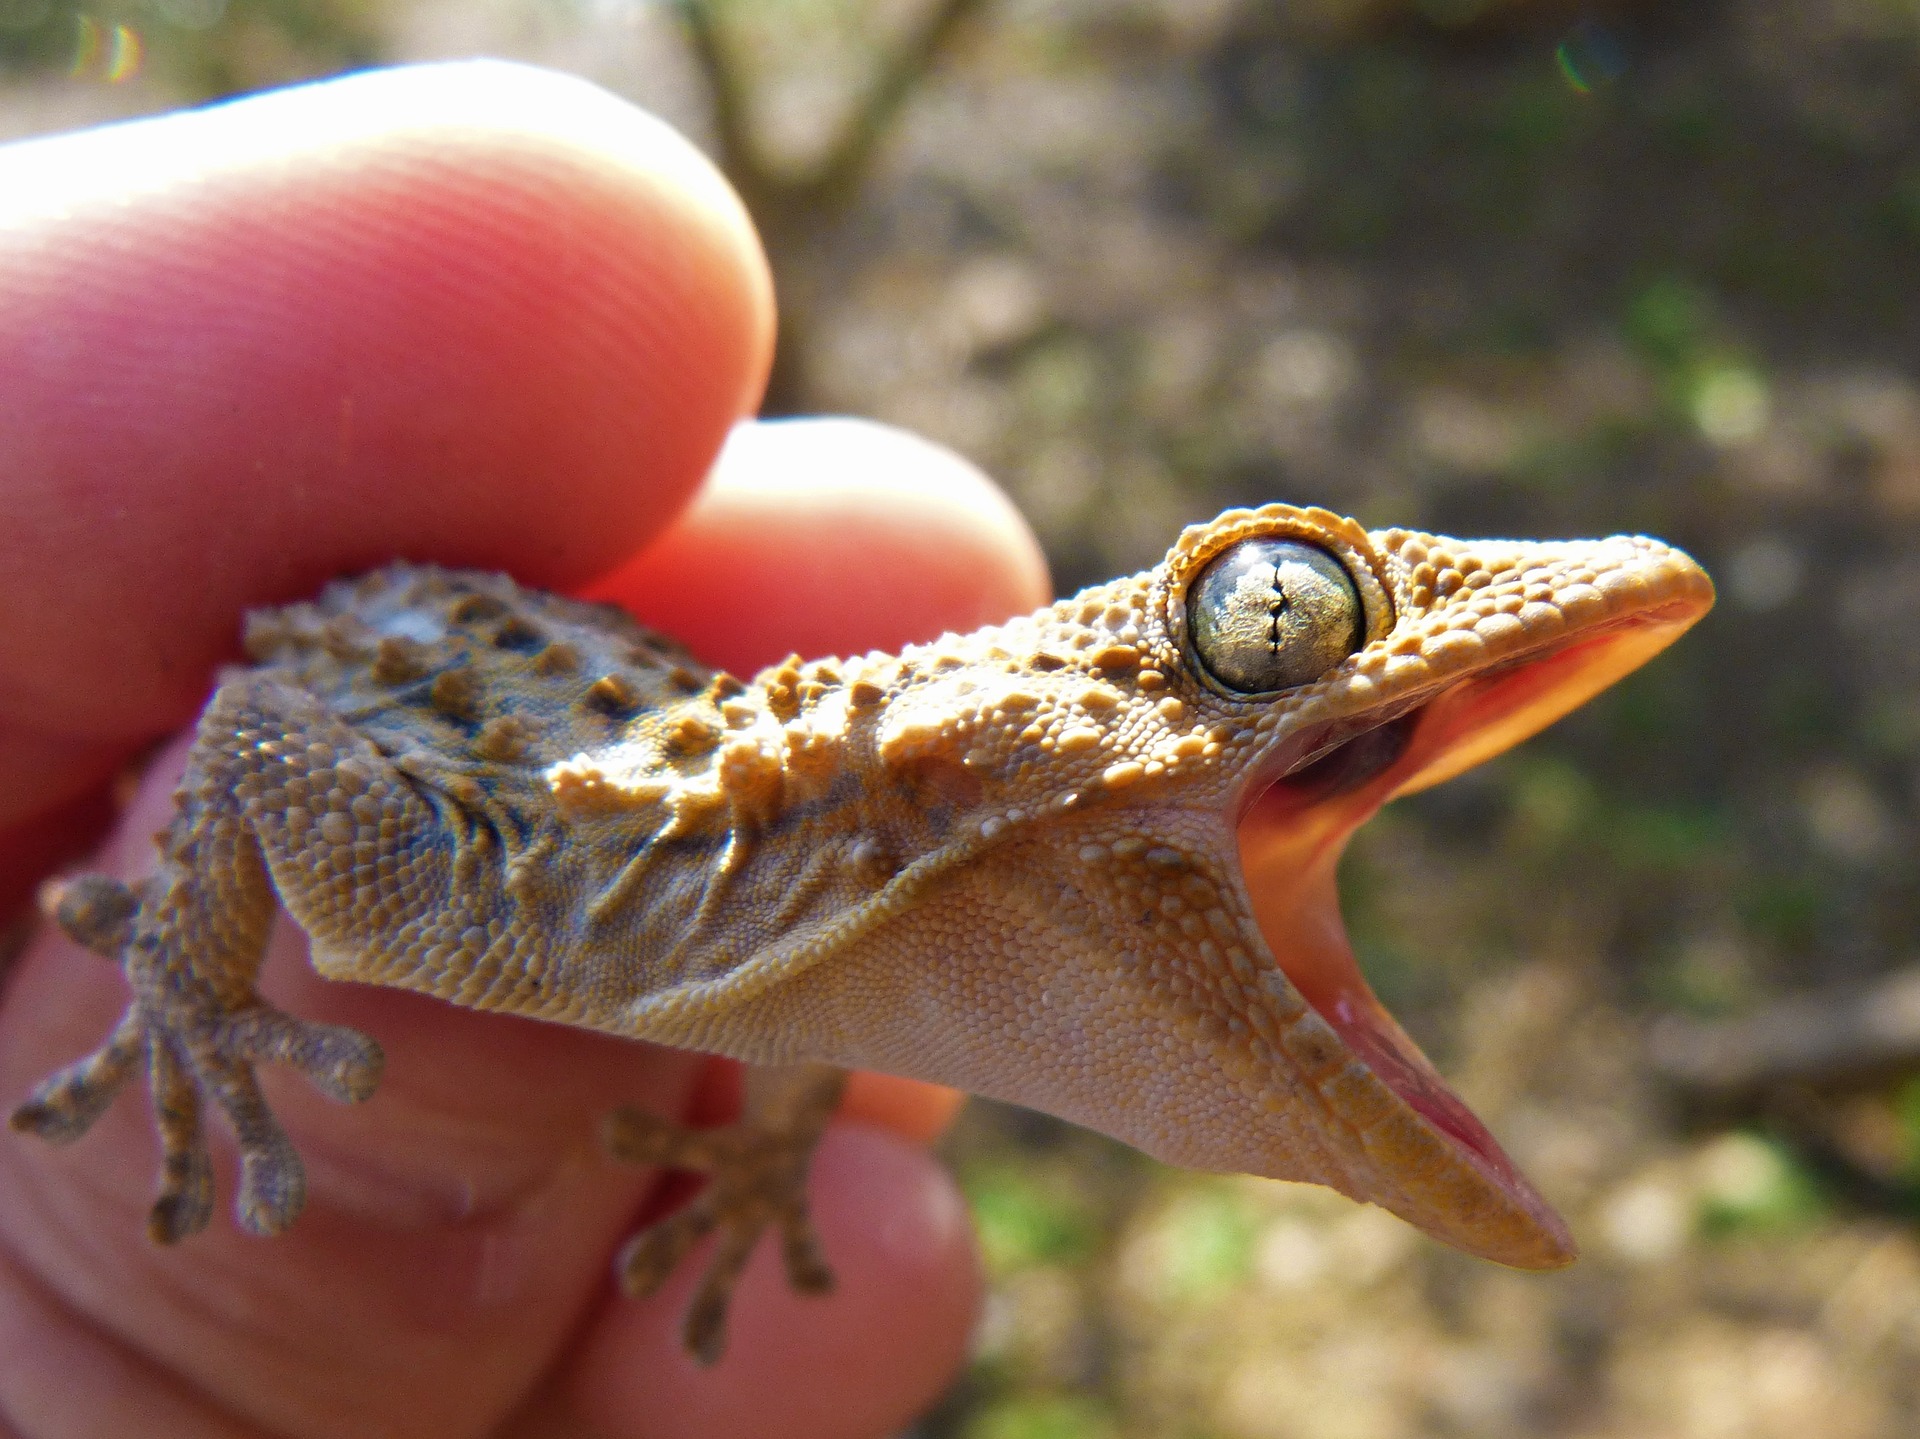 A gecko being held and screaming